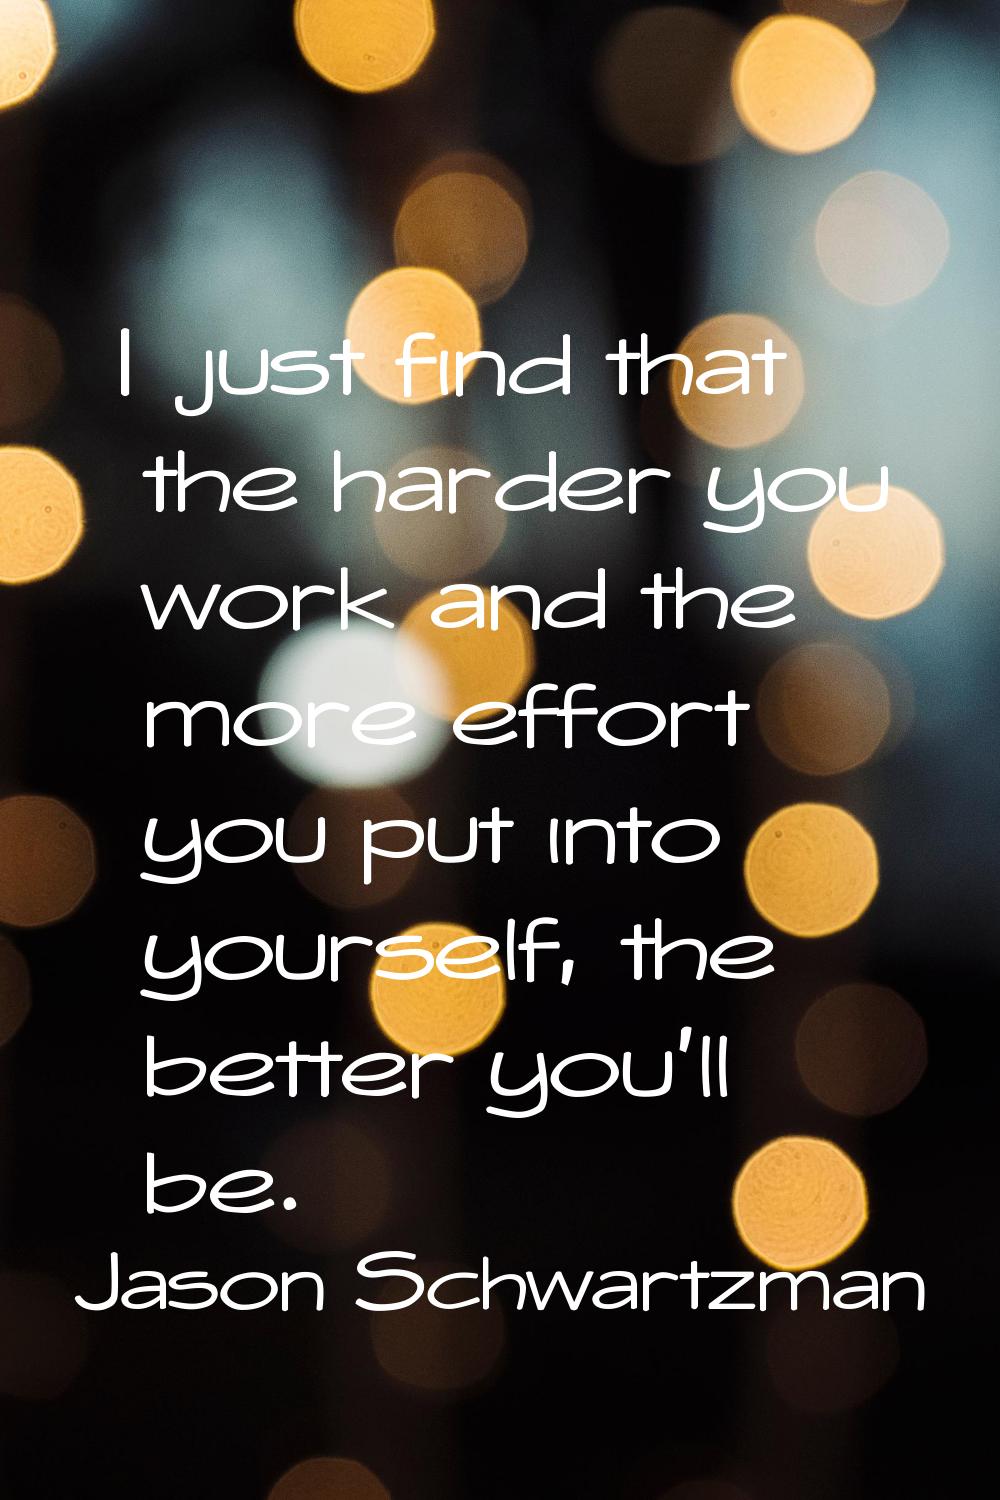 I just find that the harder you work and the more effort you put into yourself, the better you'll b